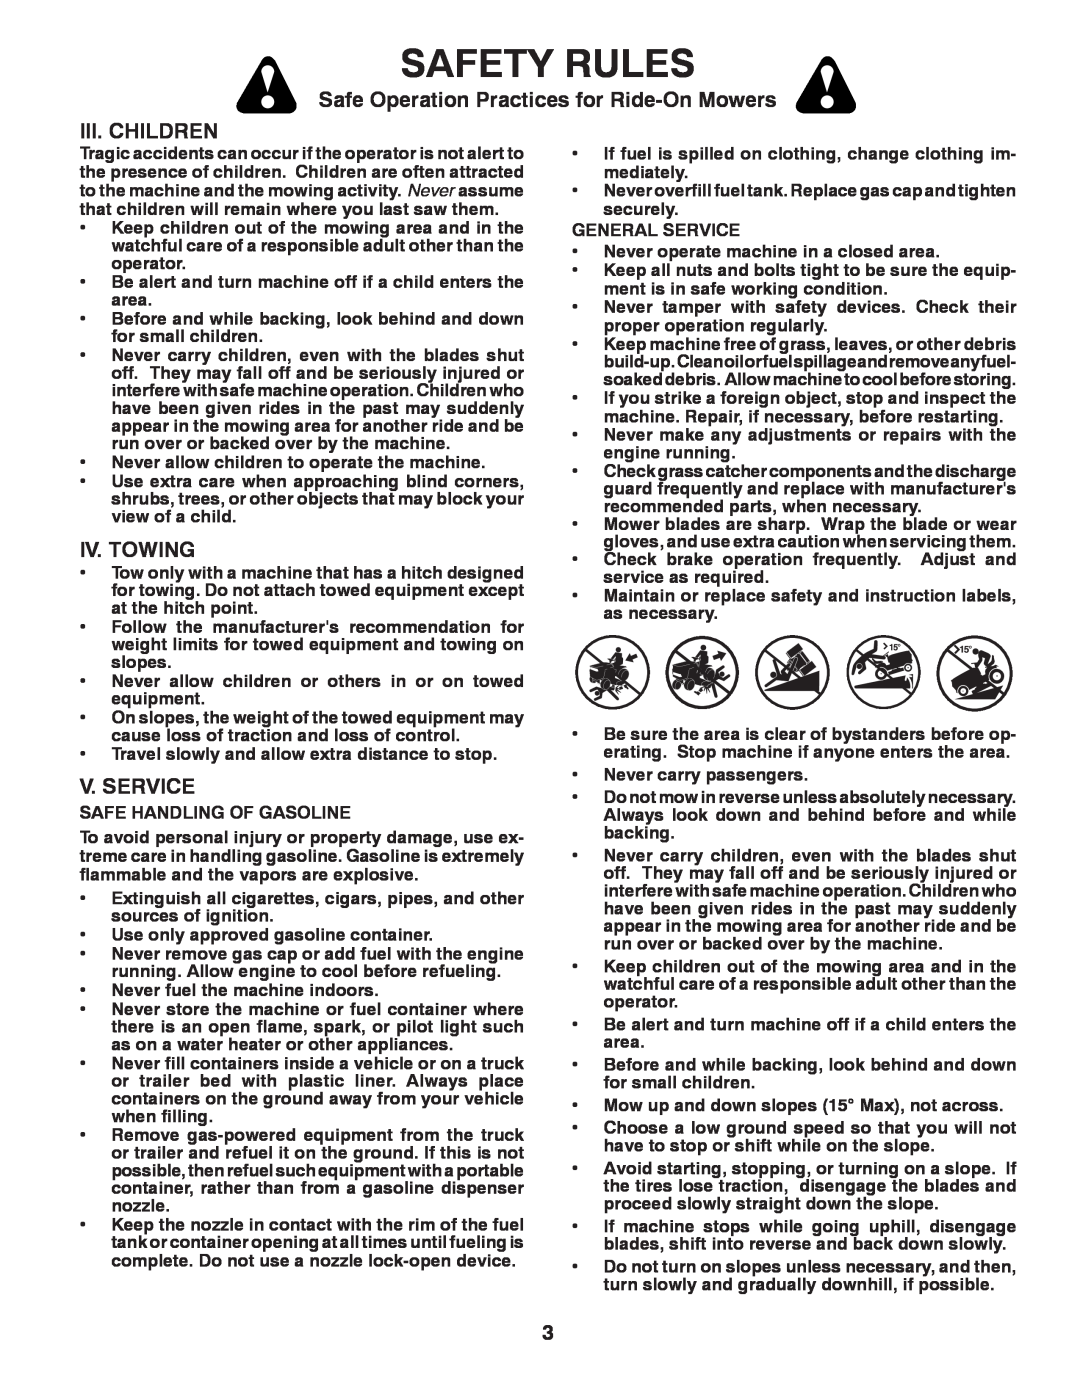 Poulan 424008 manual Iii. Children, Iv. Towing, V. Service, Safety Rules, Safe Operation Practices for Ride-On Mowers 